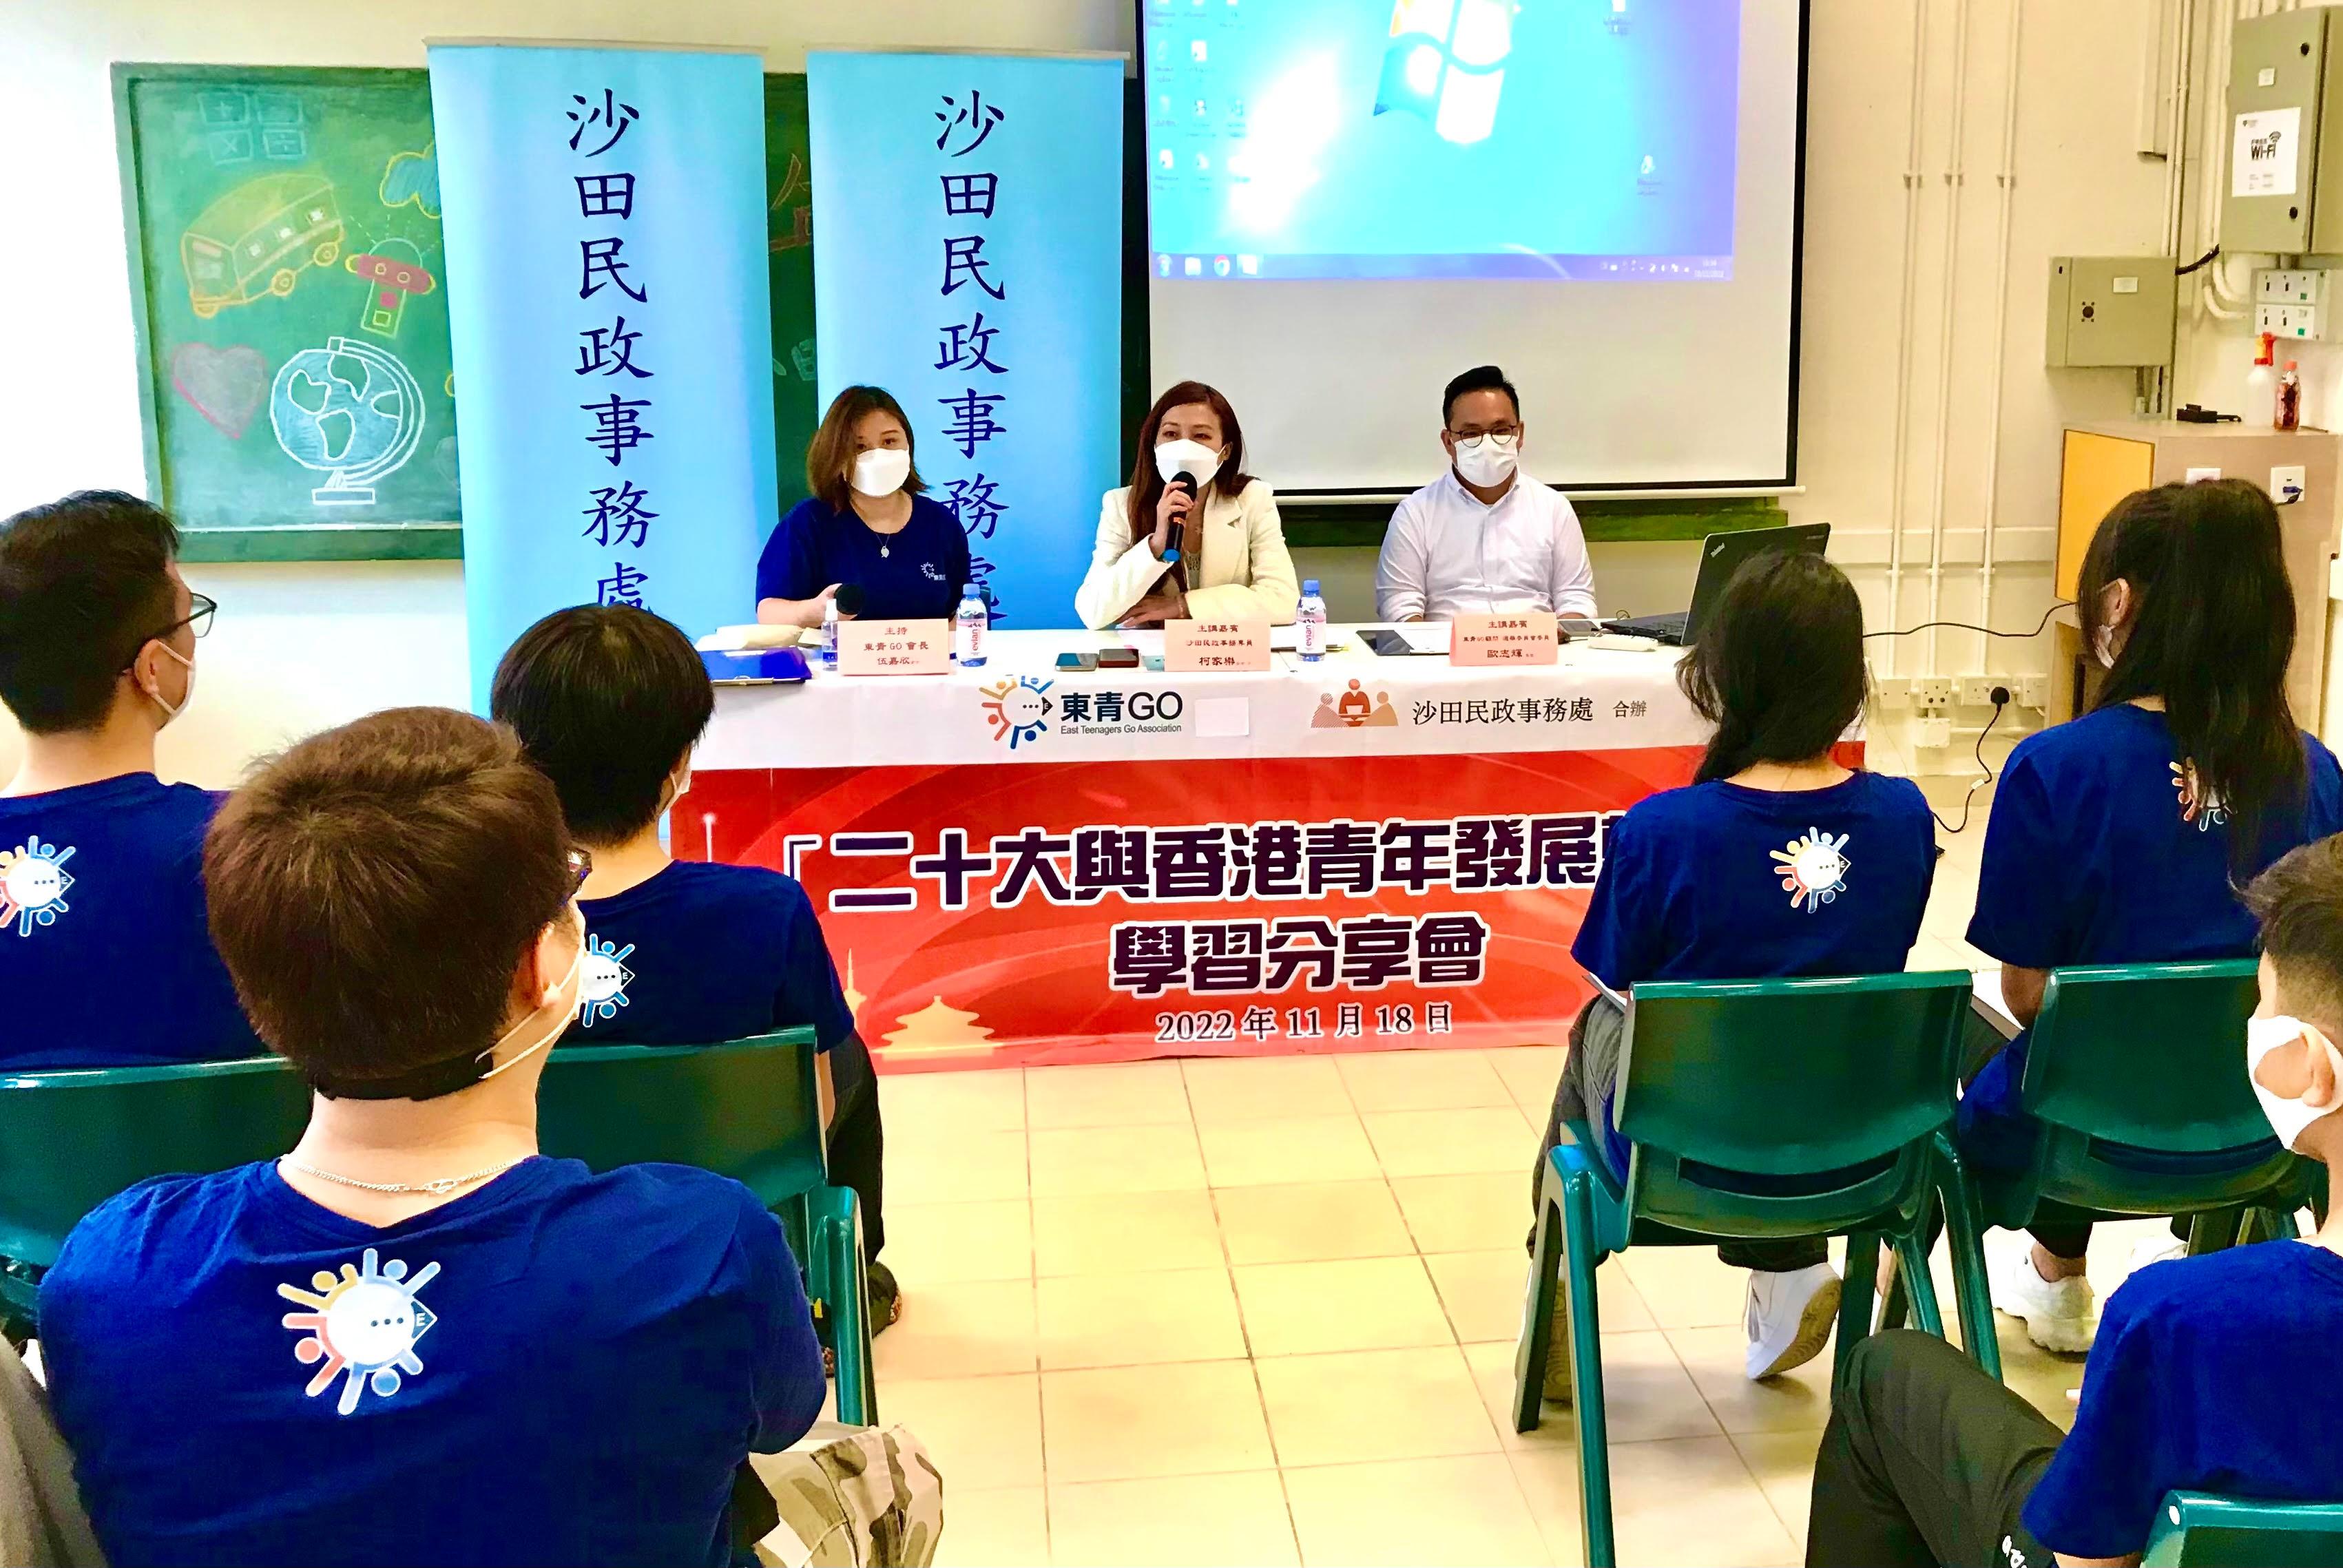 The Sha Tin District Office, together with the Hong Kong Federation of Trade Unions Shatin District Service Office and East Teenagers GO Association, held a session on "Spirit of the 20th National Congress of the CPC and Hong Kong Youth Development Blueprint" at Wu Kai Sha Youth Village on November 18. Photo shows the District Officer (Sha Tin), Miss Carol Or (centre), speaking at the session.